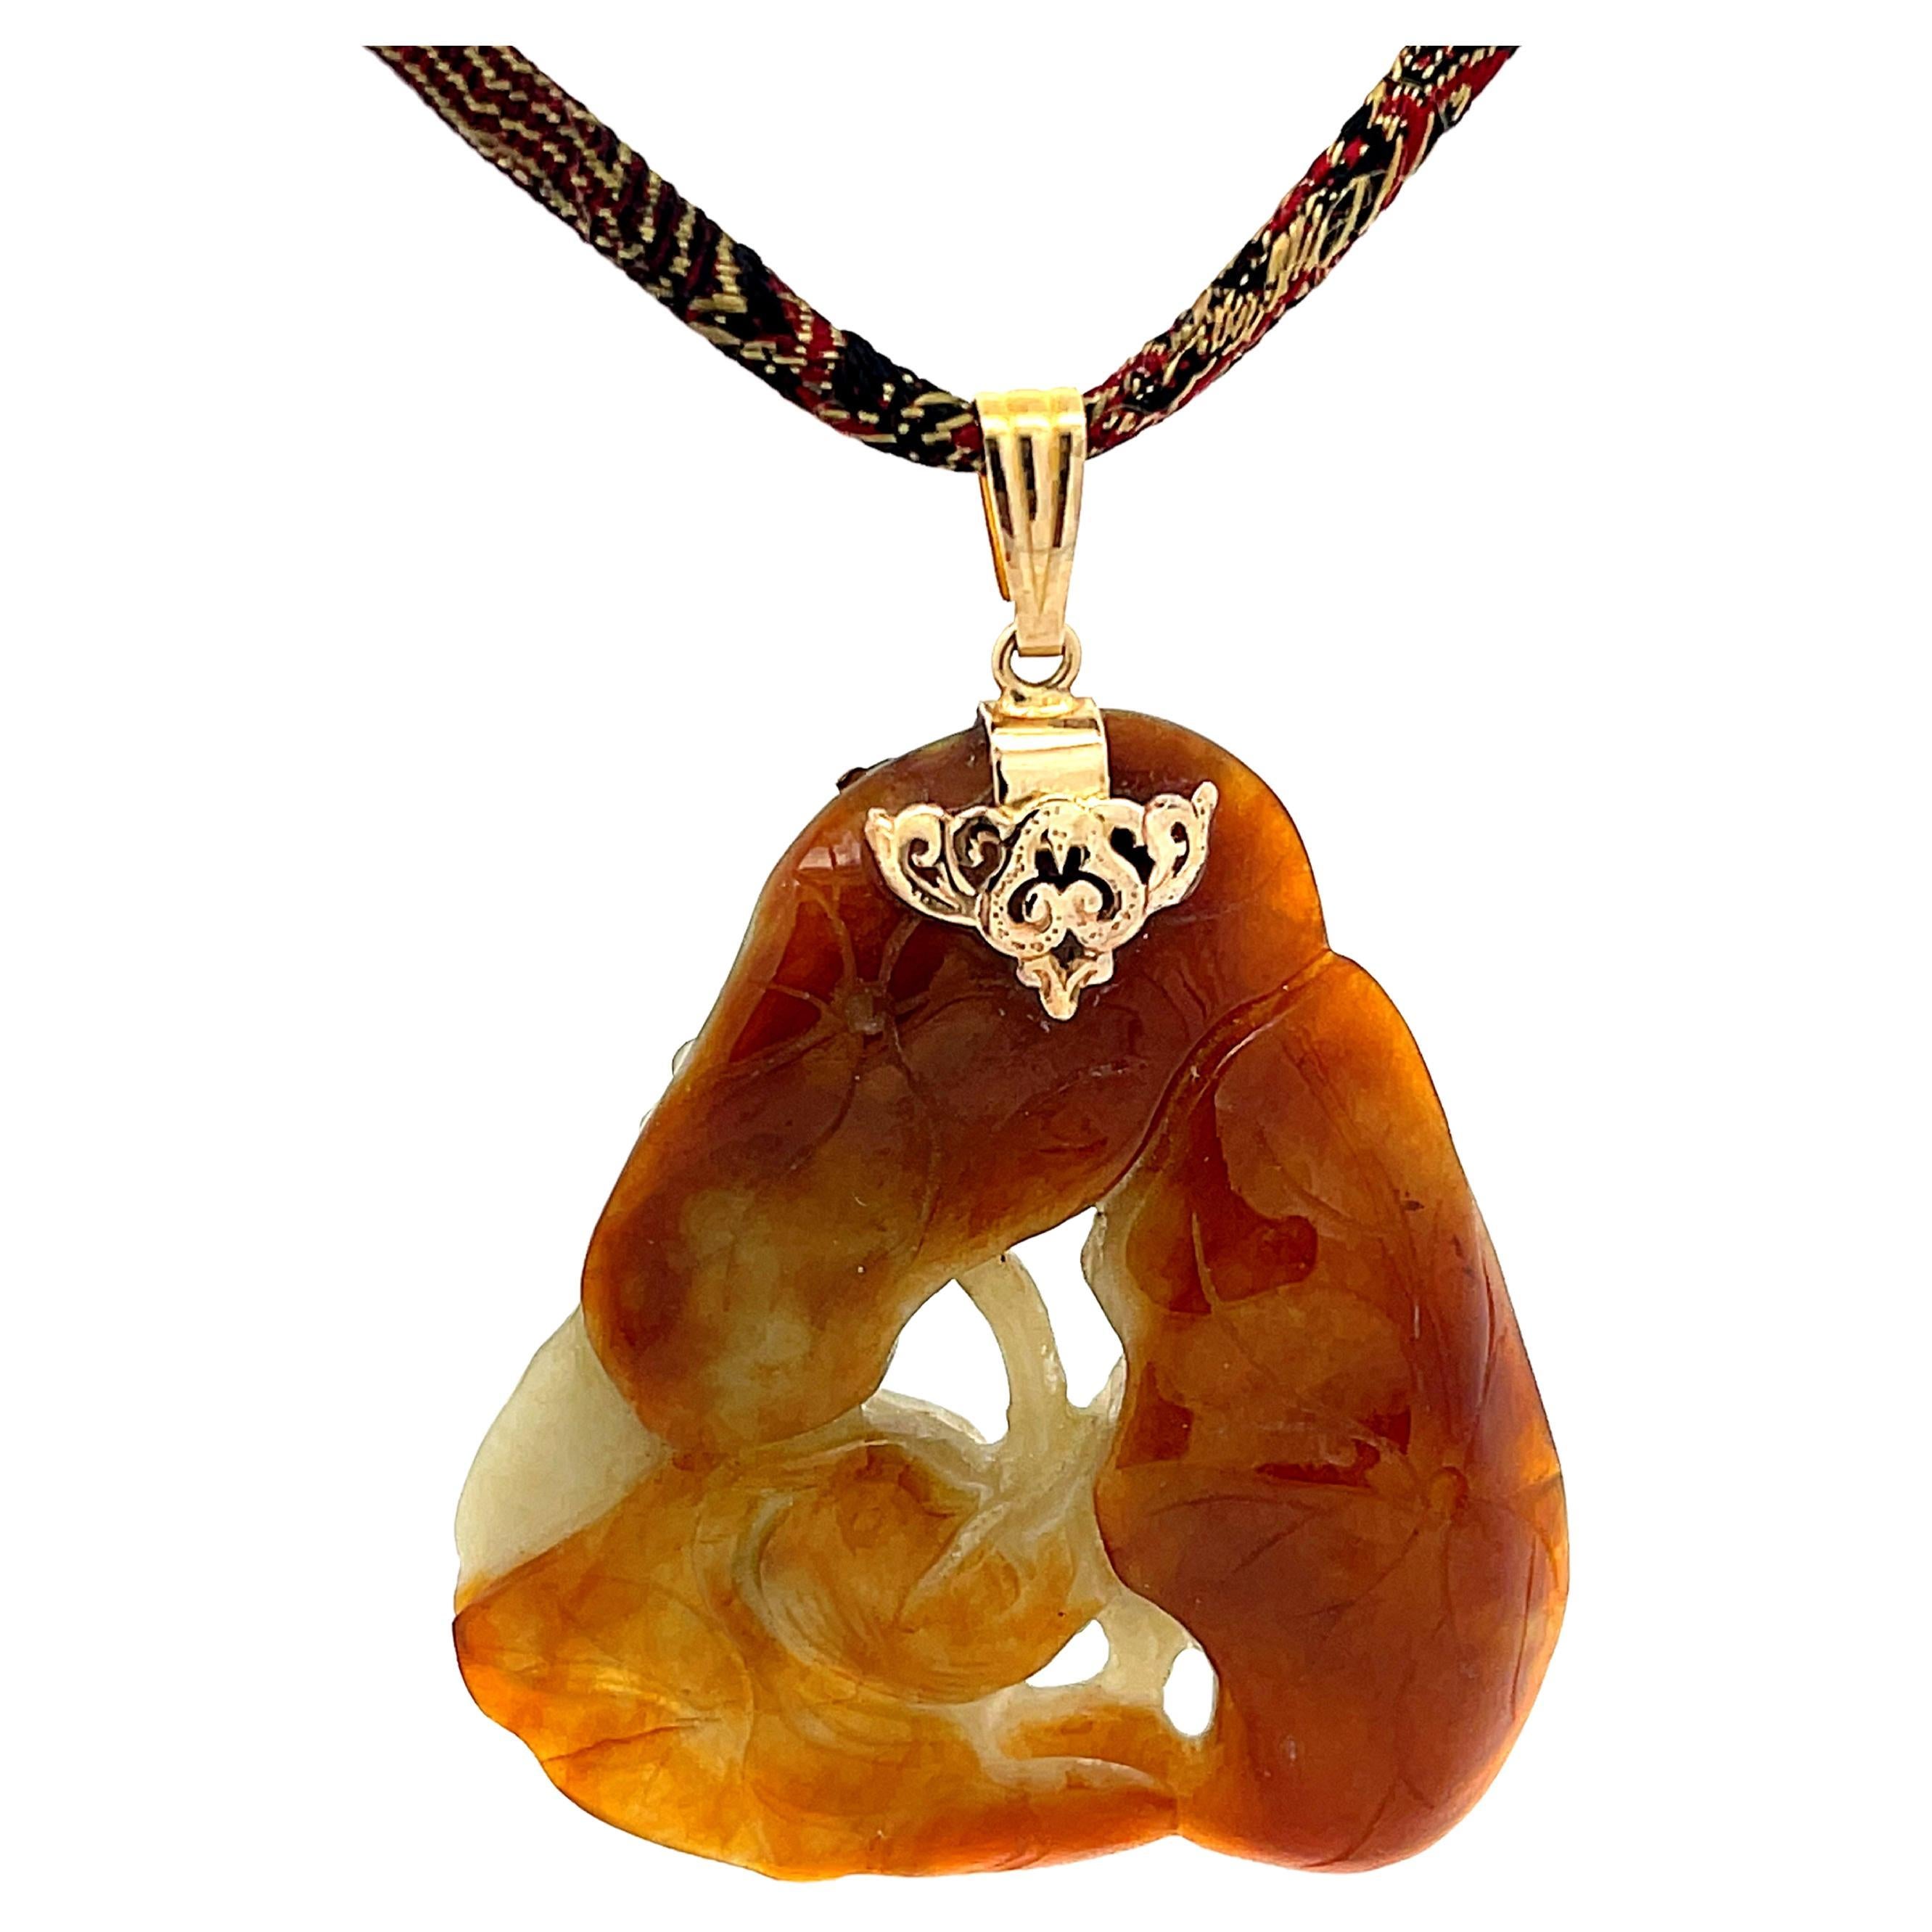 Rare Mings Carved Nephrite Jade Pendant and Cord in 14k Yellow Gold